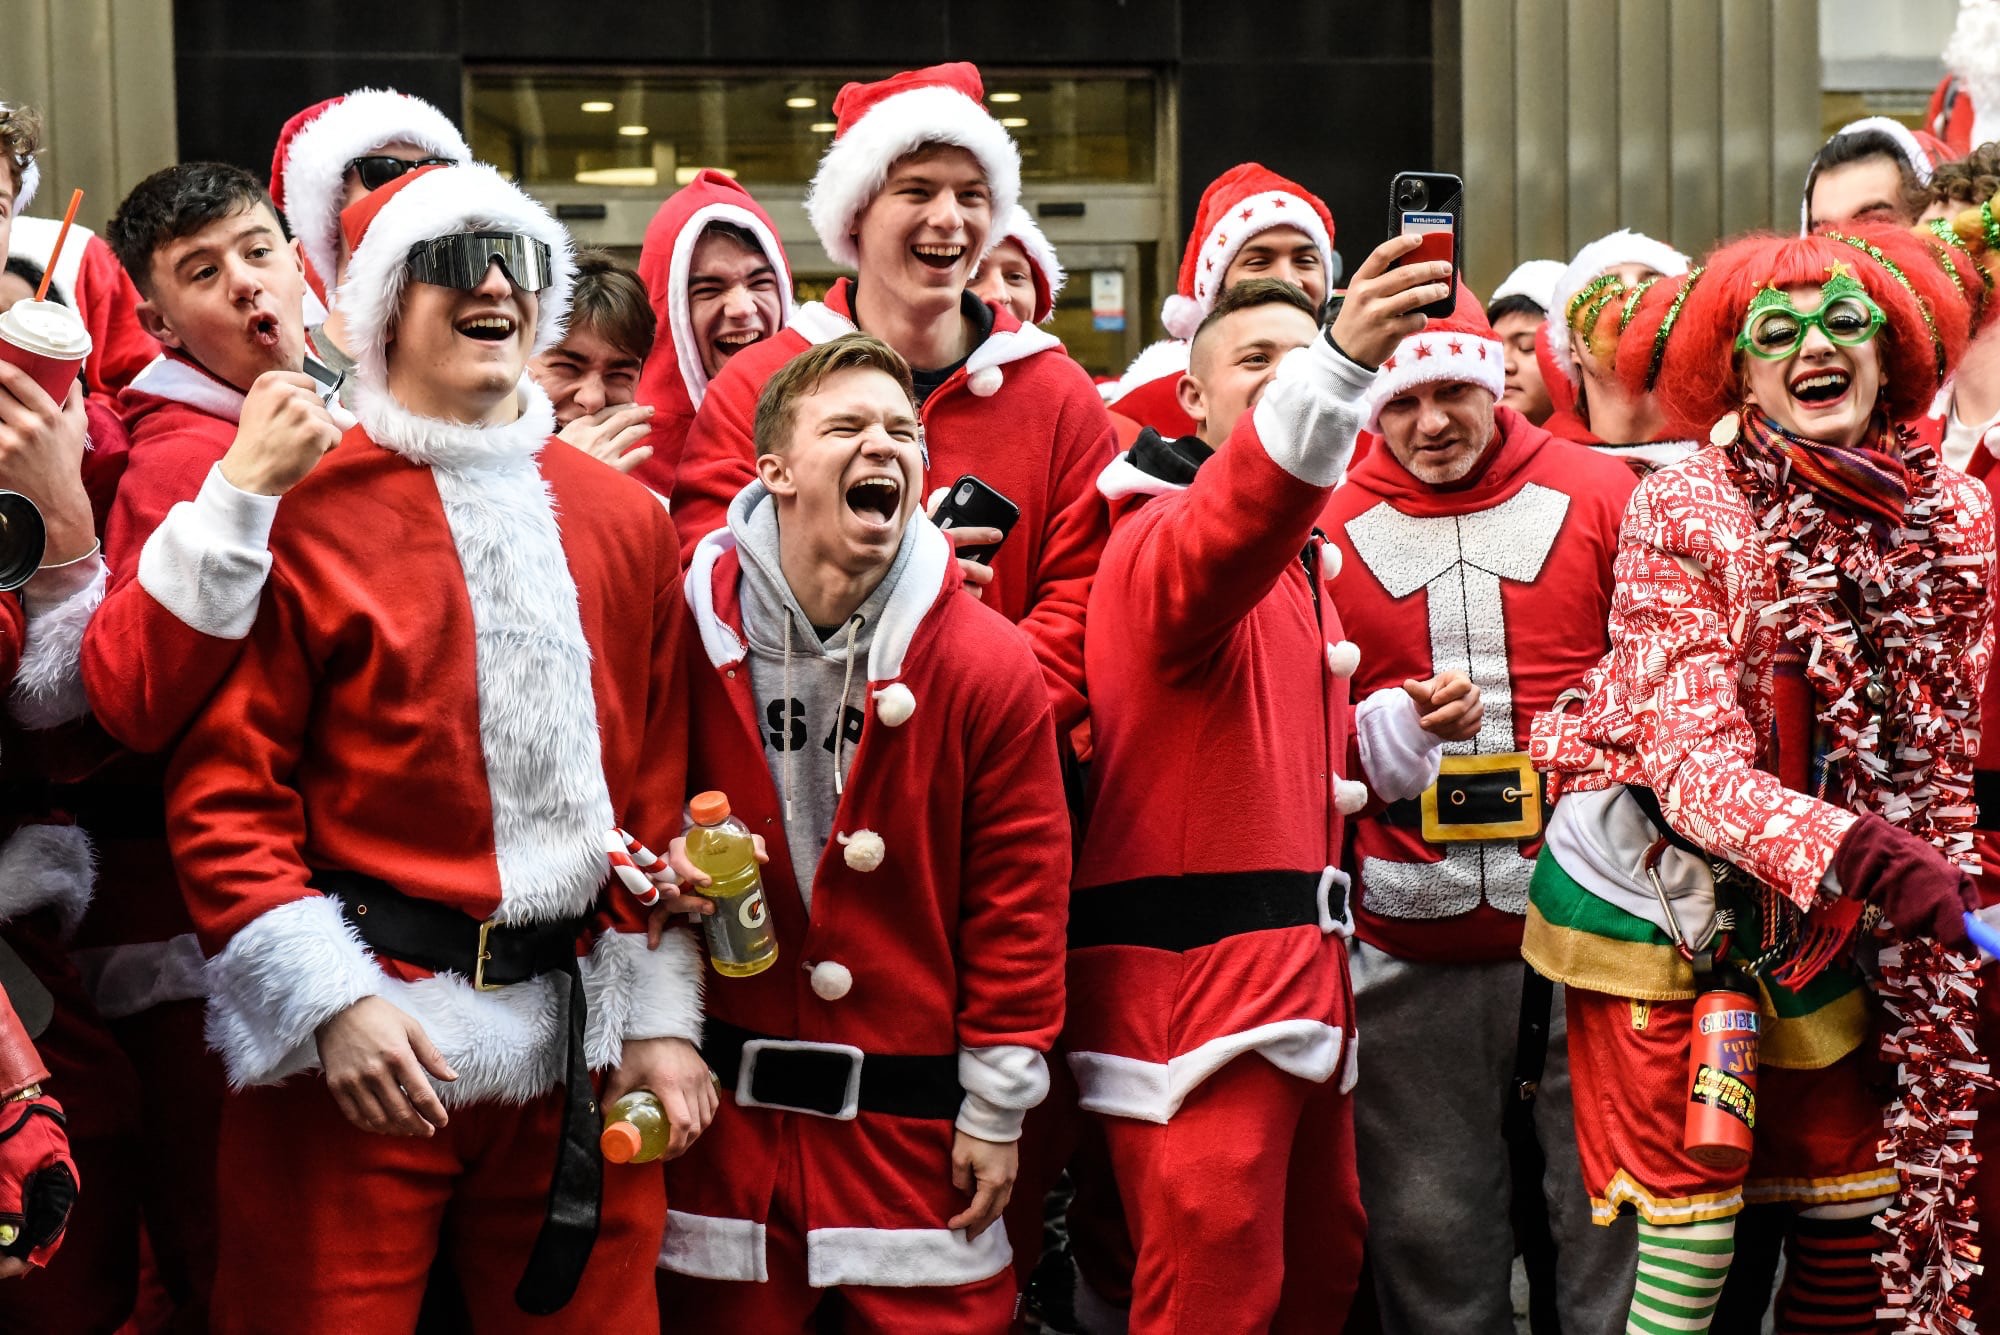 A group of revelers at SantaCon laugh at something on the street.